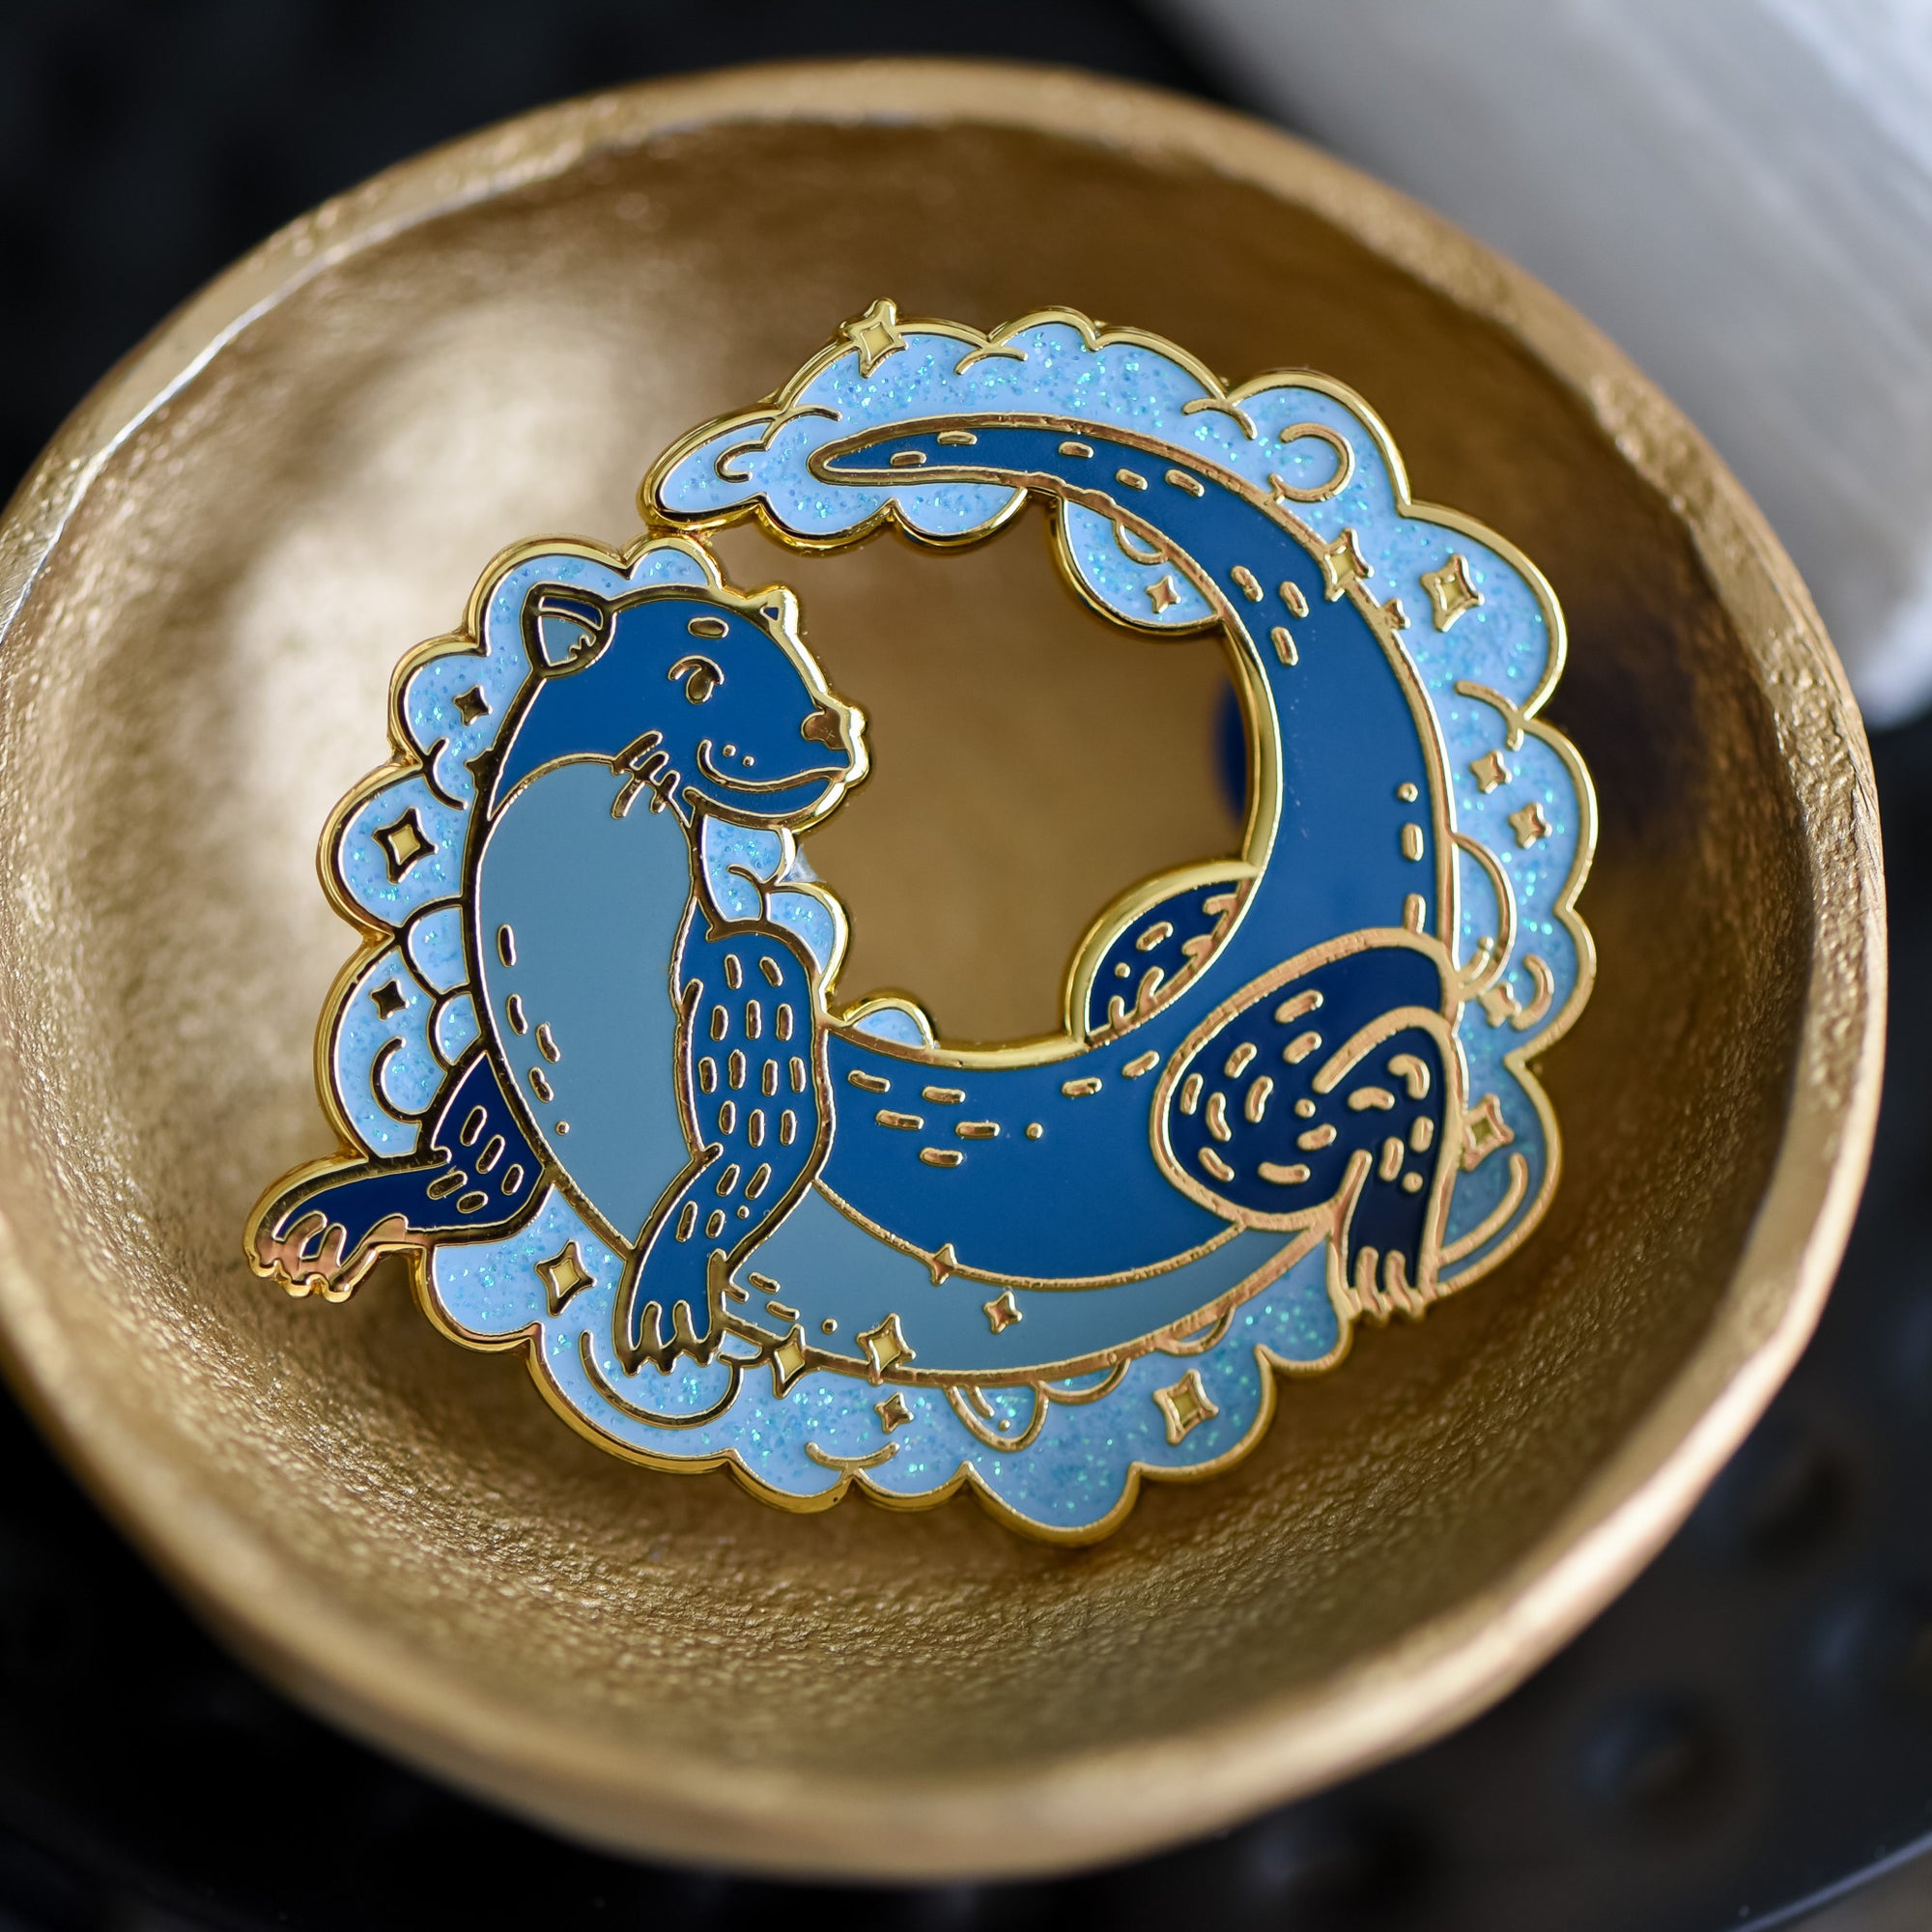 Otter Magical Animal Familiar Cirtter Collection Enamel Pin is a blue otter with a glittery cloud around him.